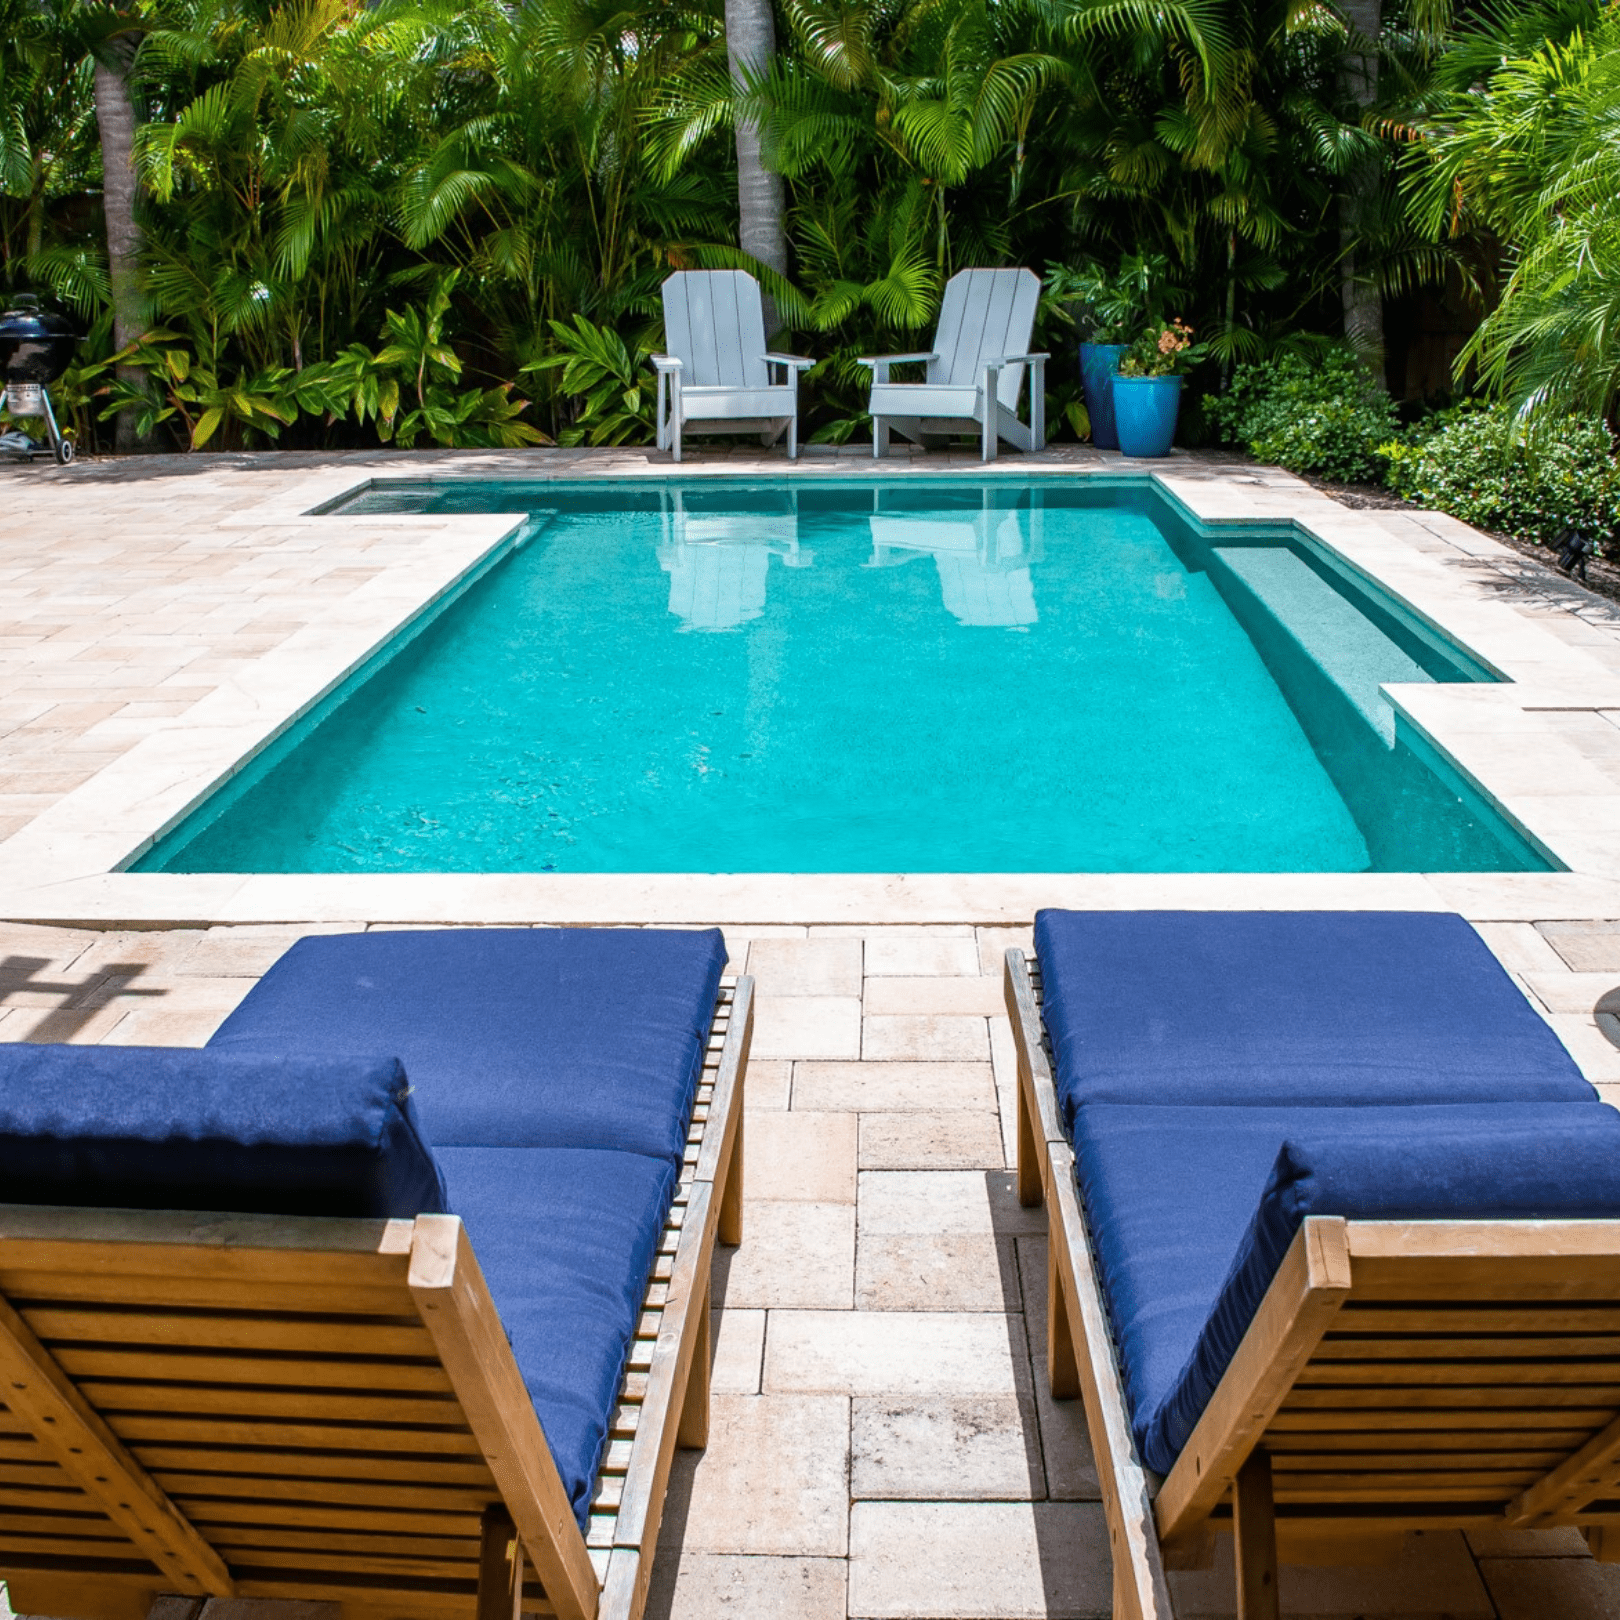 At our Anna Maria island vacation rentals view looking at a rectangular pool from behind two wooden loungers with royal blue cushions and two gray adirondack chairs at the other end of the pool of Island Time on Anna Maria Island